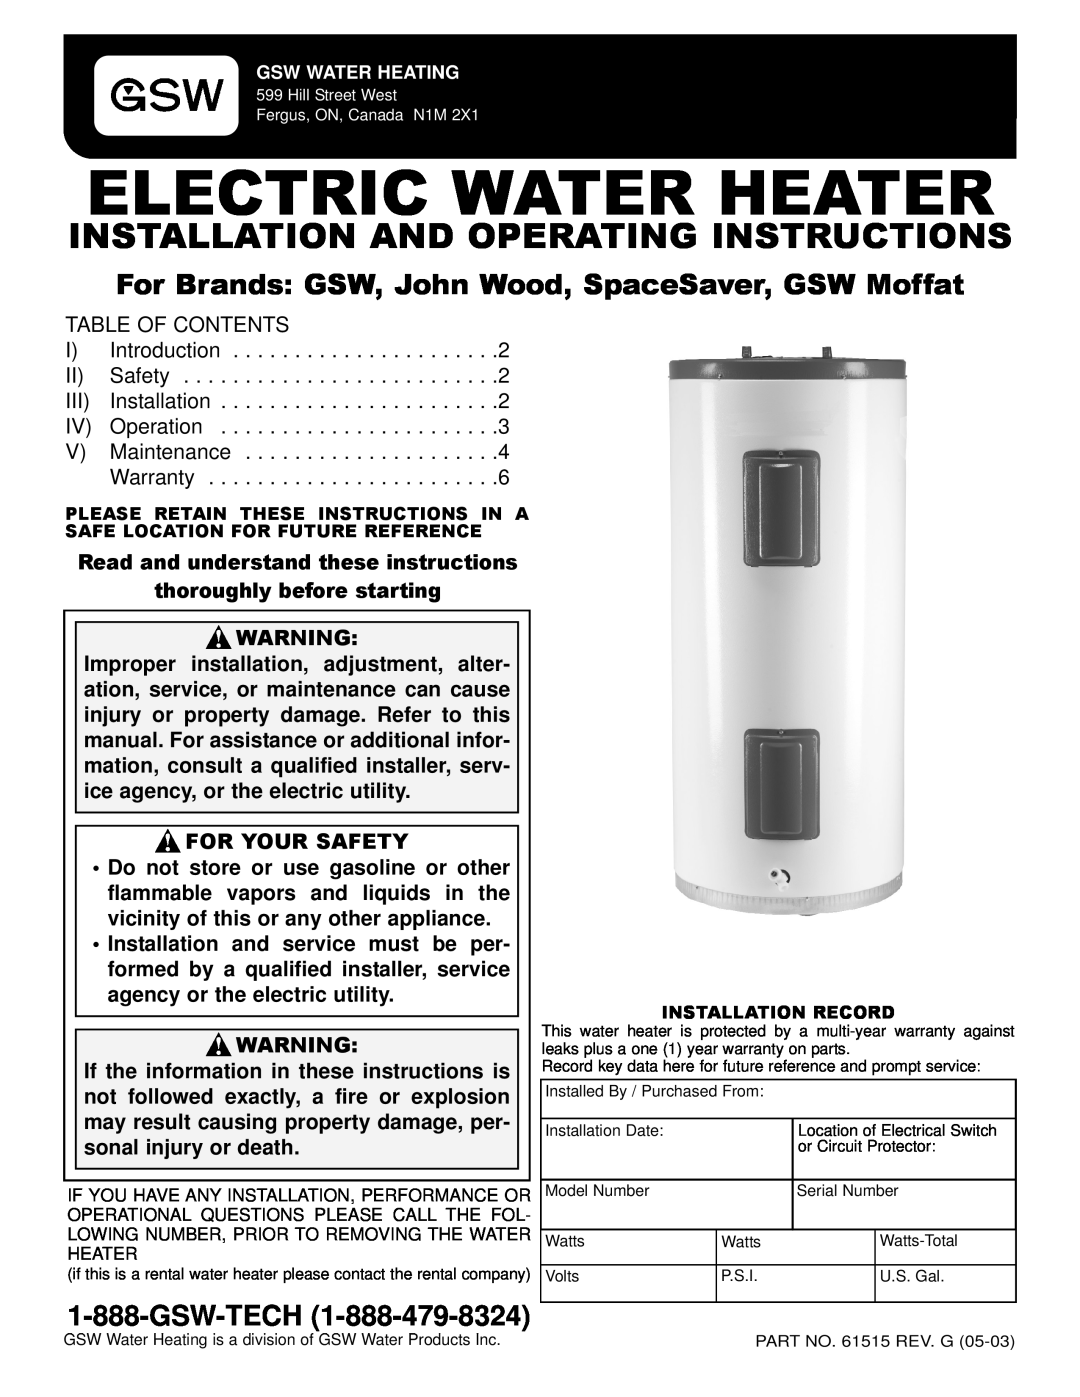 GSW Electric Water Heater P/N 61515 REV. G (05-03) warranty Installation And Operating Instructions, Gsw-Tech 